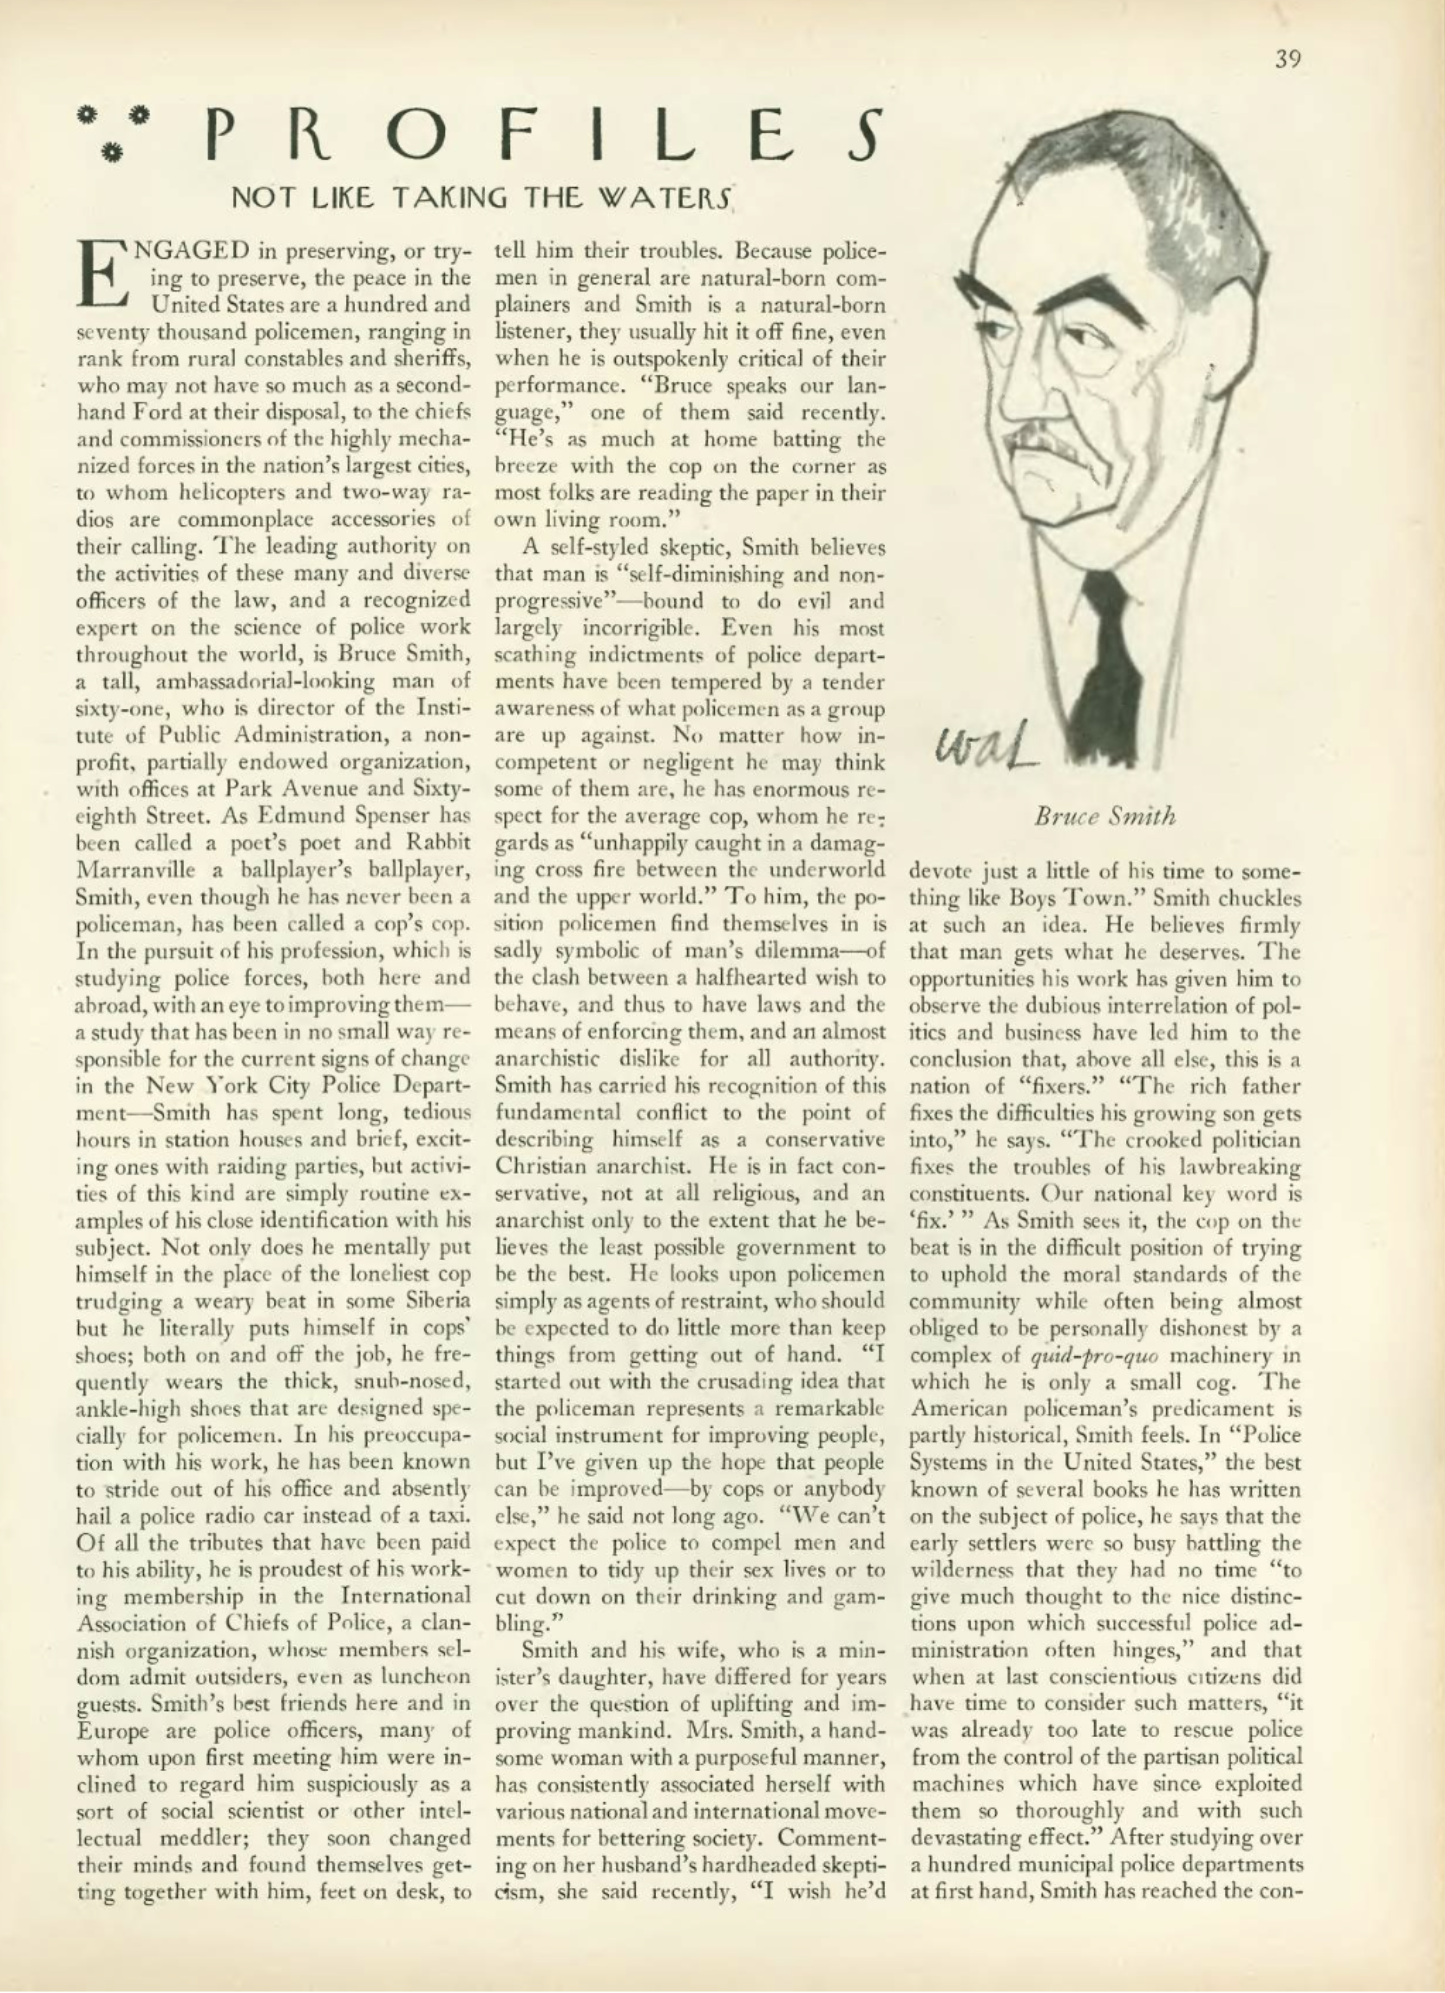 Bruce Smith: Police Reformer/ The New Yorker/ February 27, 1954